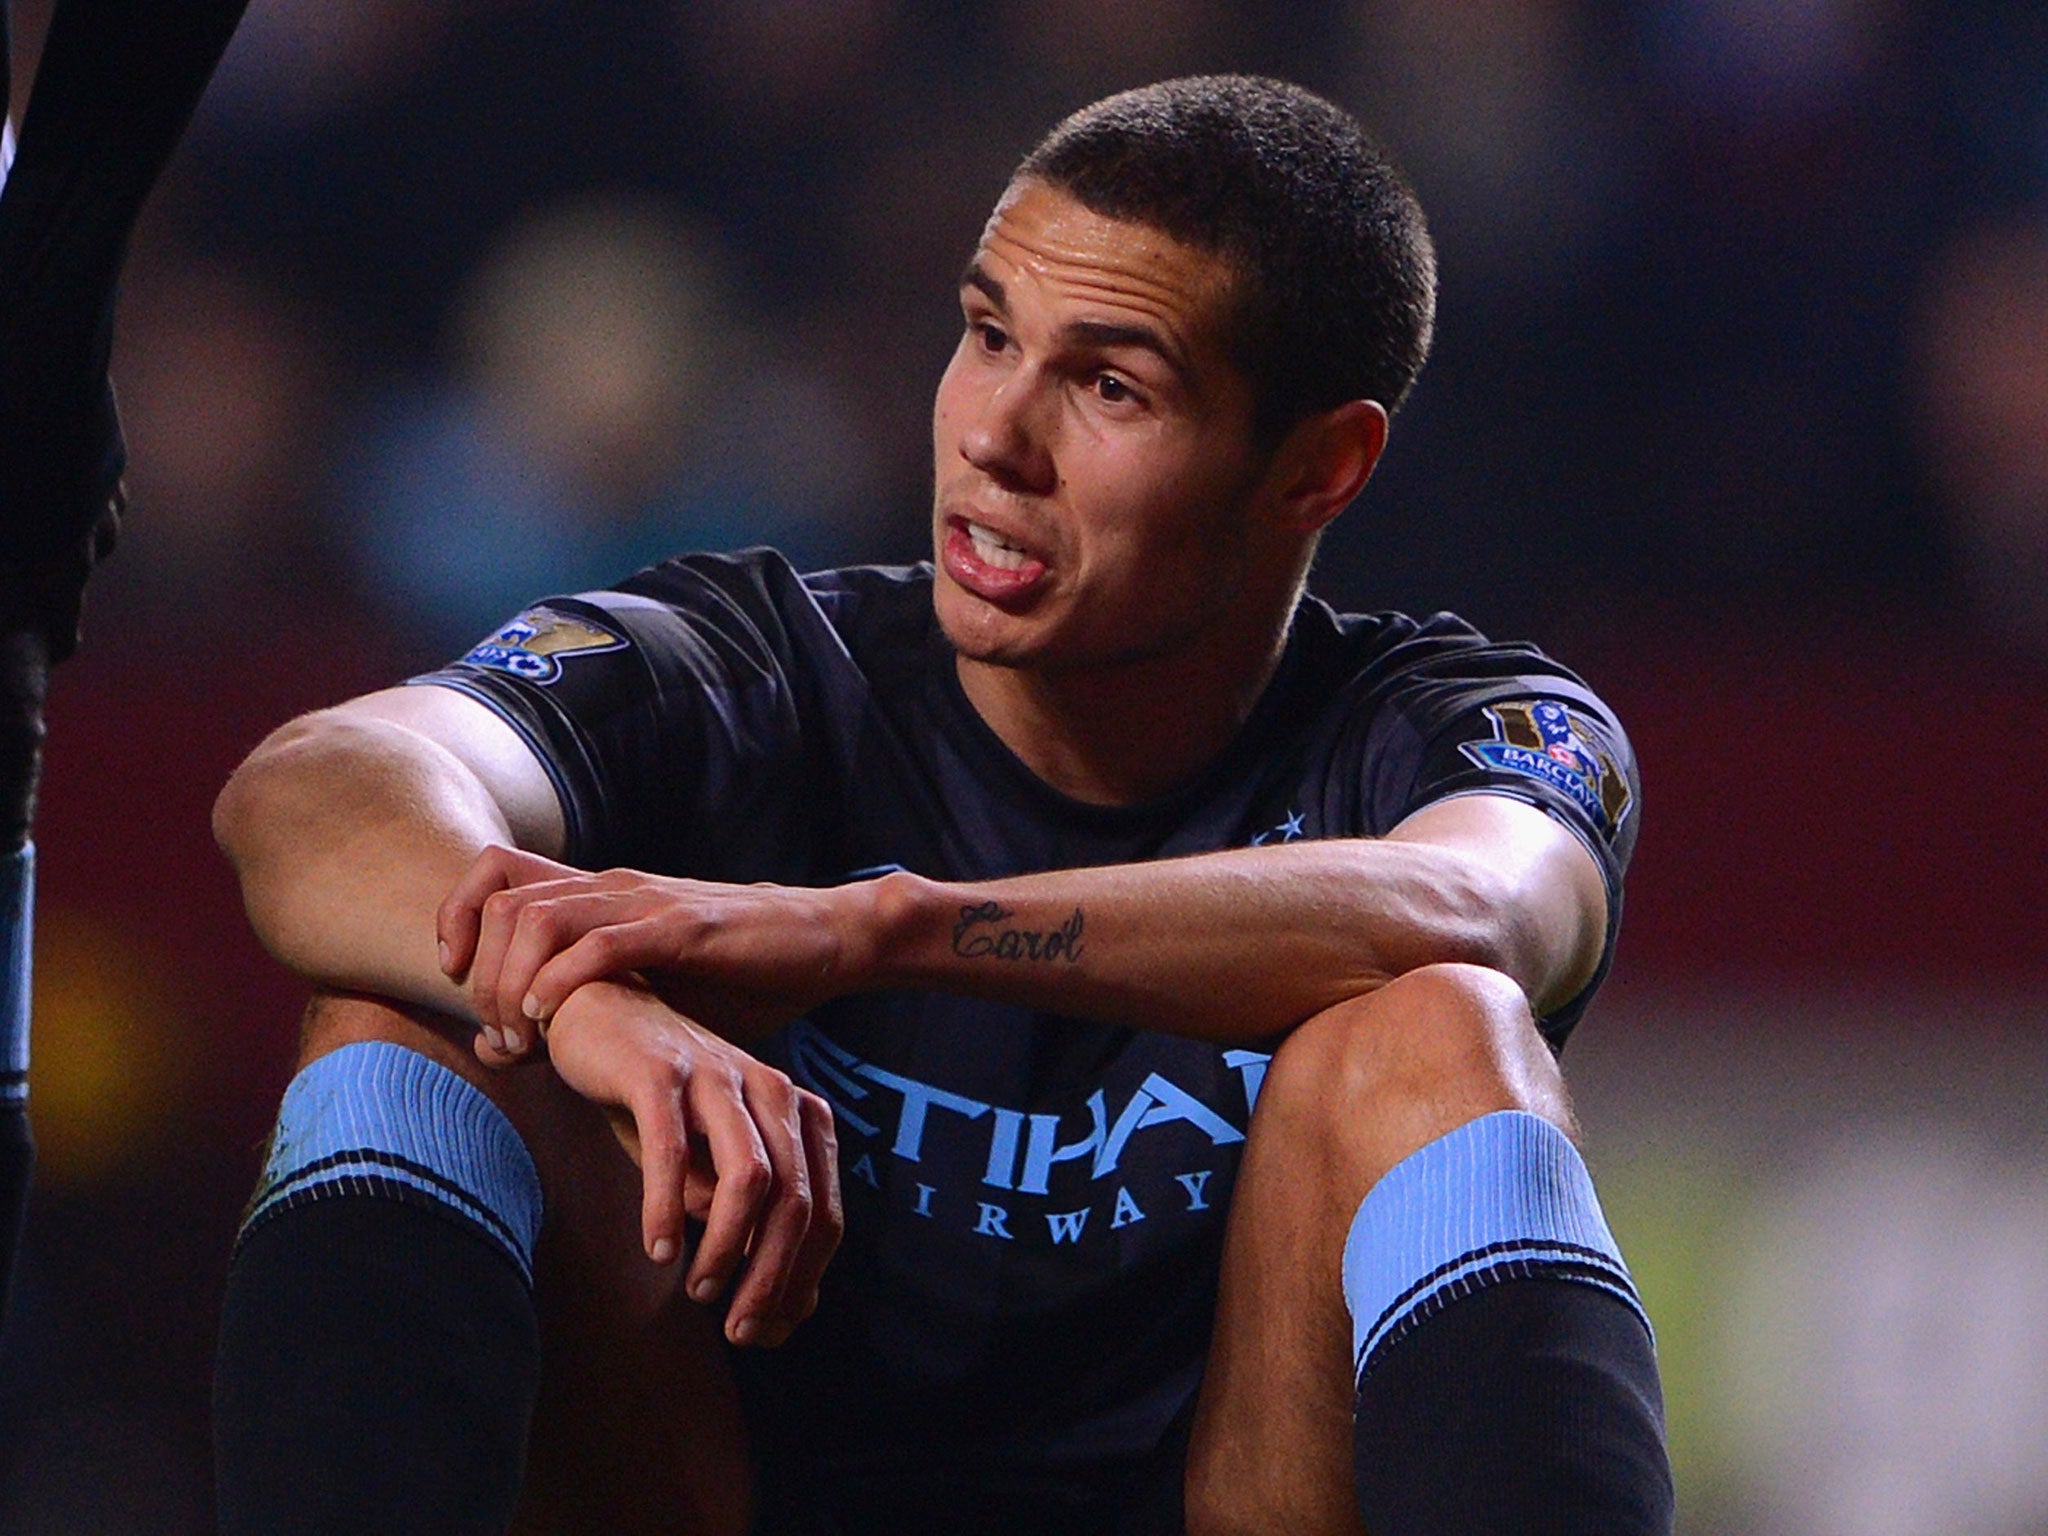 Jack Rodwell could be heading for the exit at Manchester City